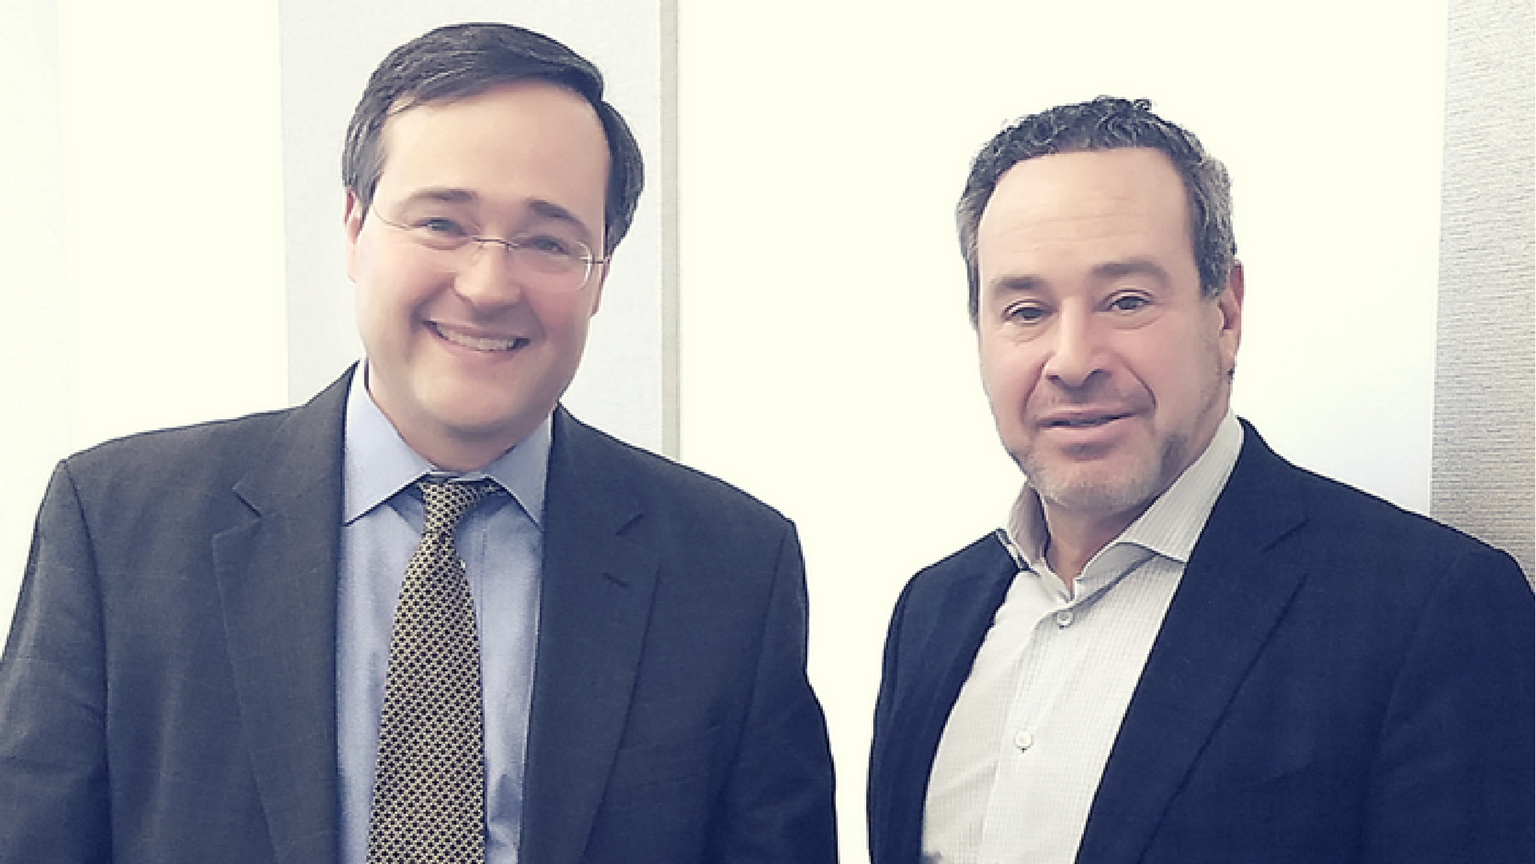 Discussion with David Frum